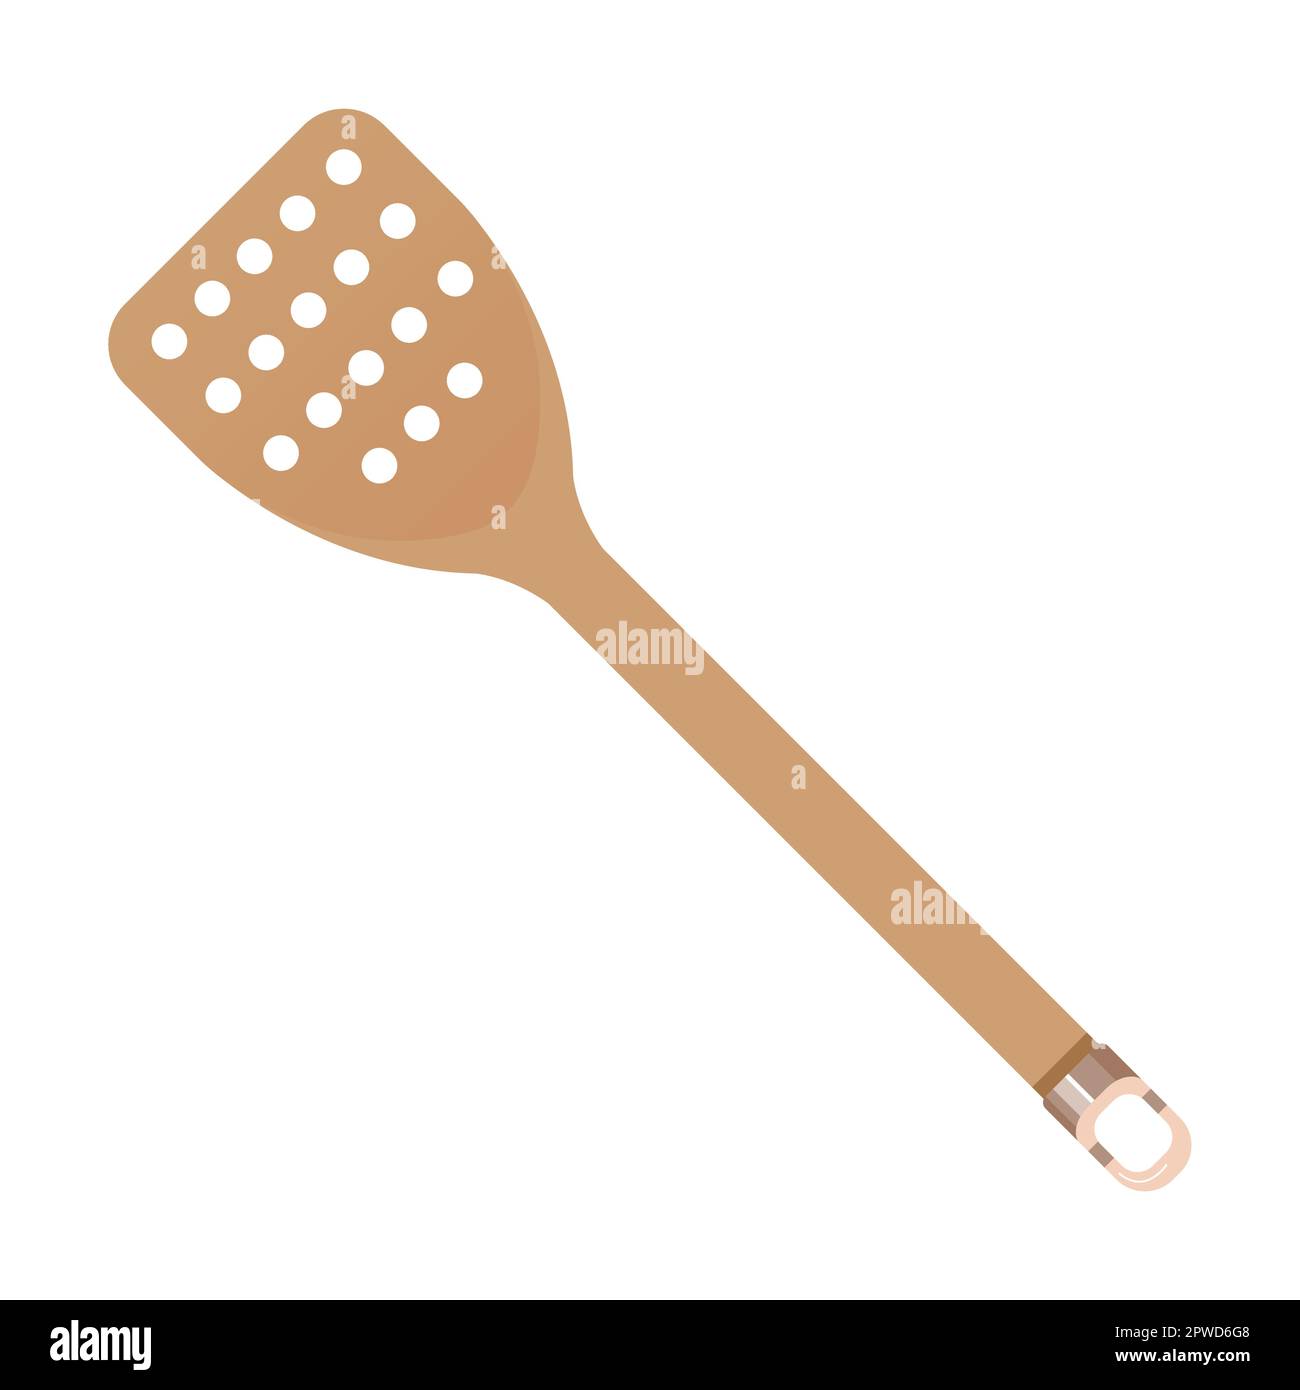 https://c8.alamy.com/comp/2PWD6G8/kitchen-utensil-and-tool-spoon-with-holes-vector-illustration-of-accessory-for-cooking-frying-or-eating-food-cartoon-isolated-on-white-2PWD6G8.jpg